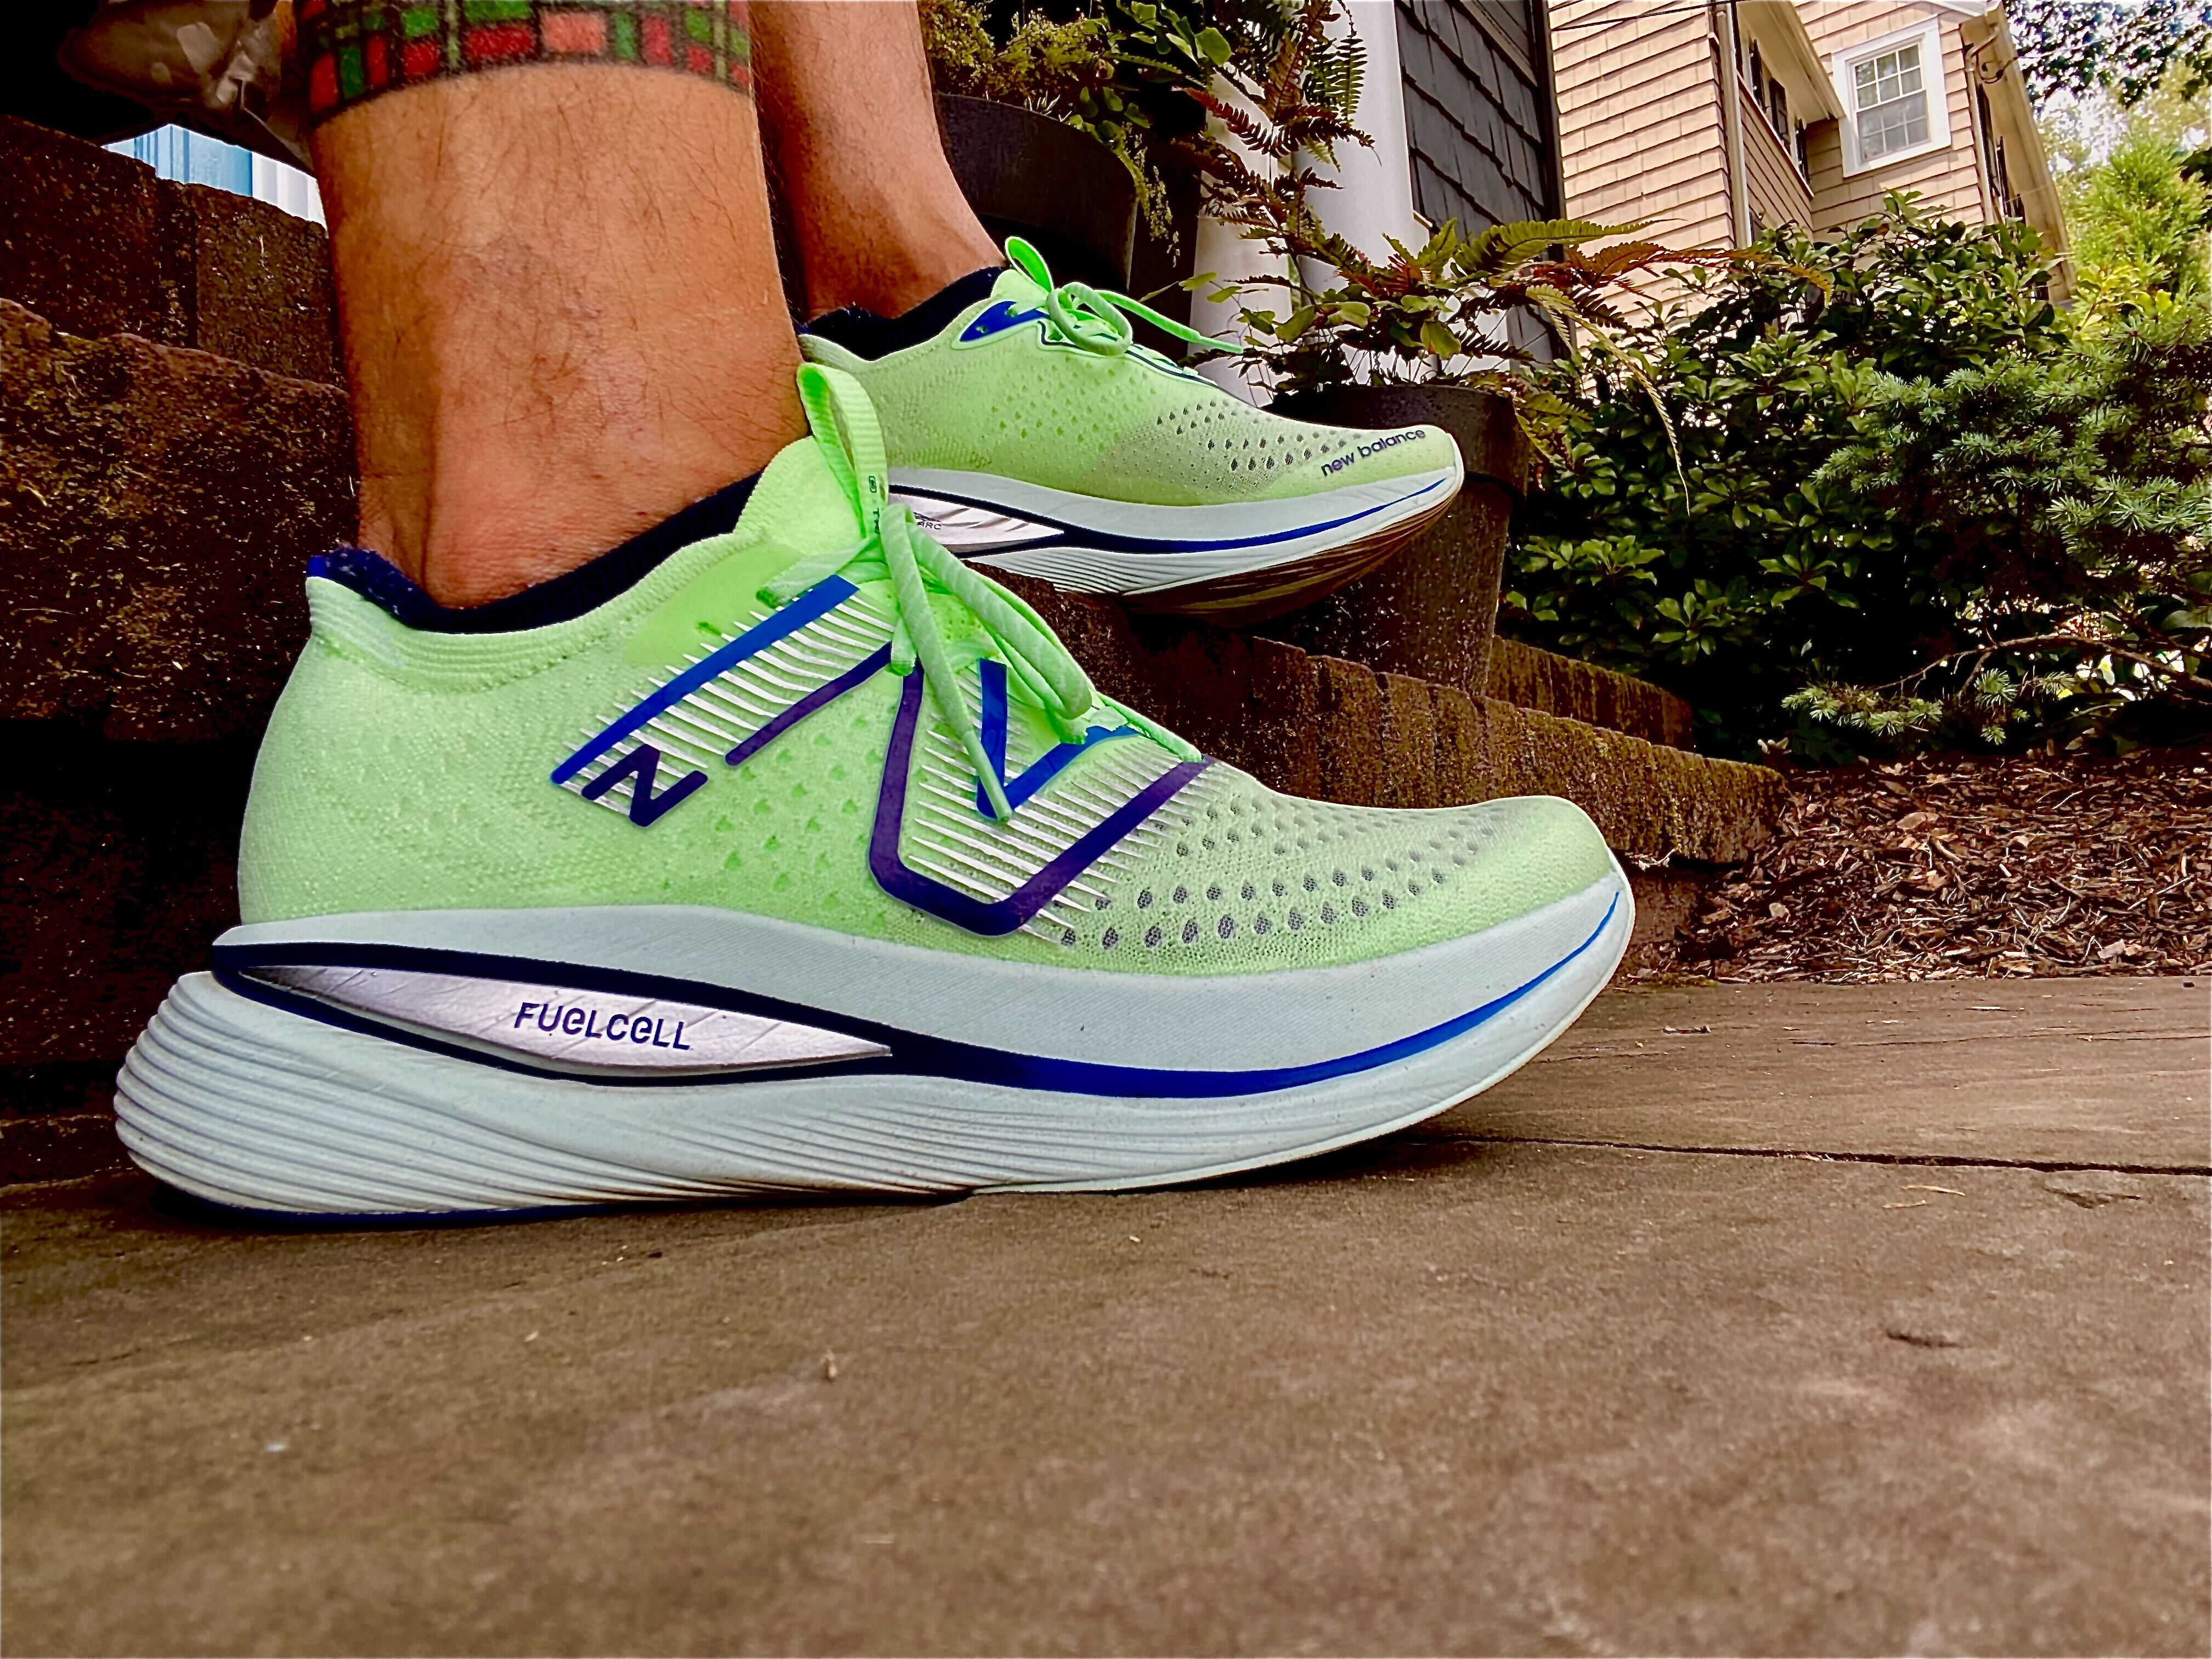 Hoka running & hiking boots - which Hoka shoe is right for me? - Larry Adler